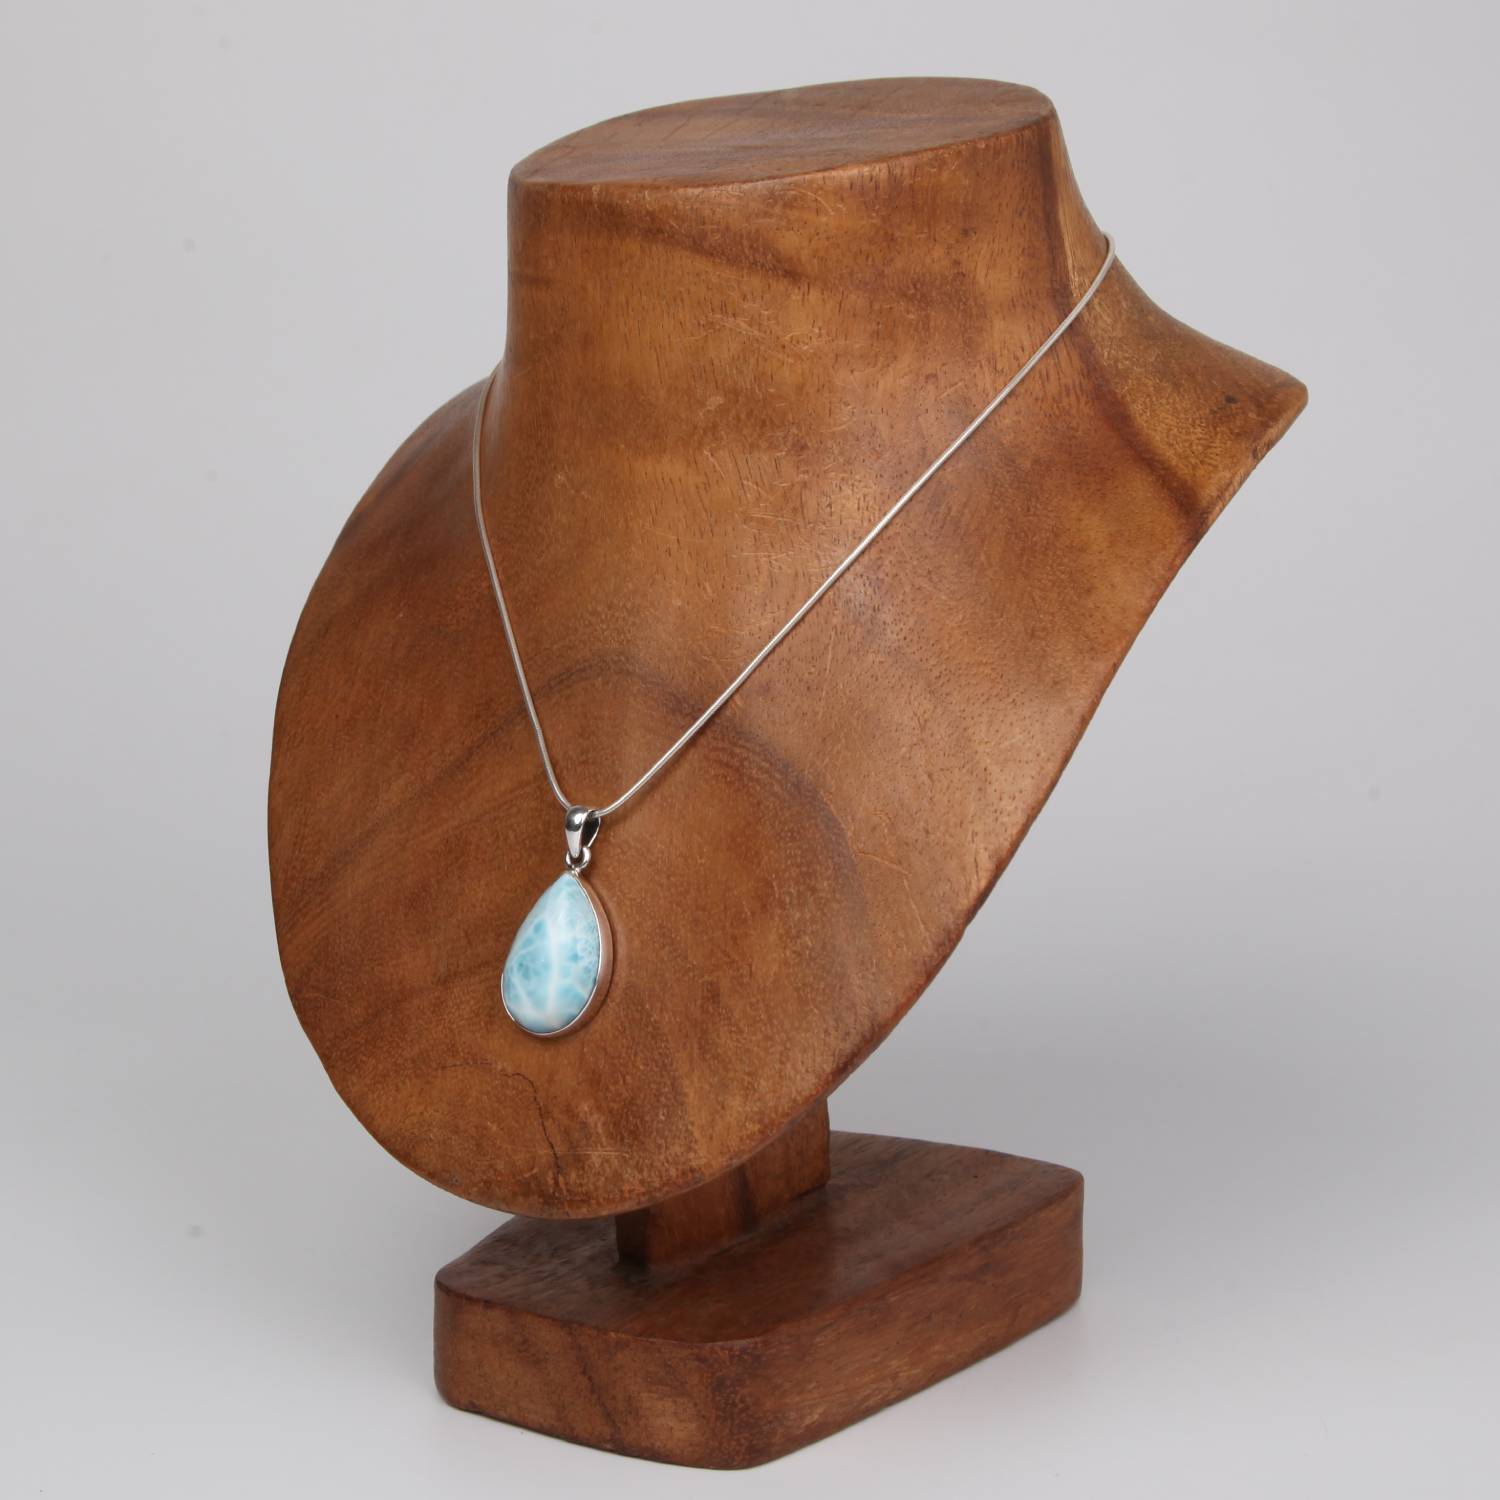 Sterling Silver Pendant with Larimar Stone